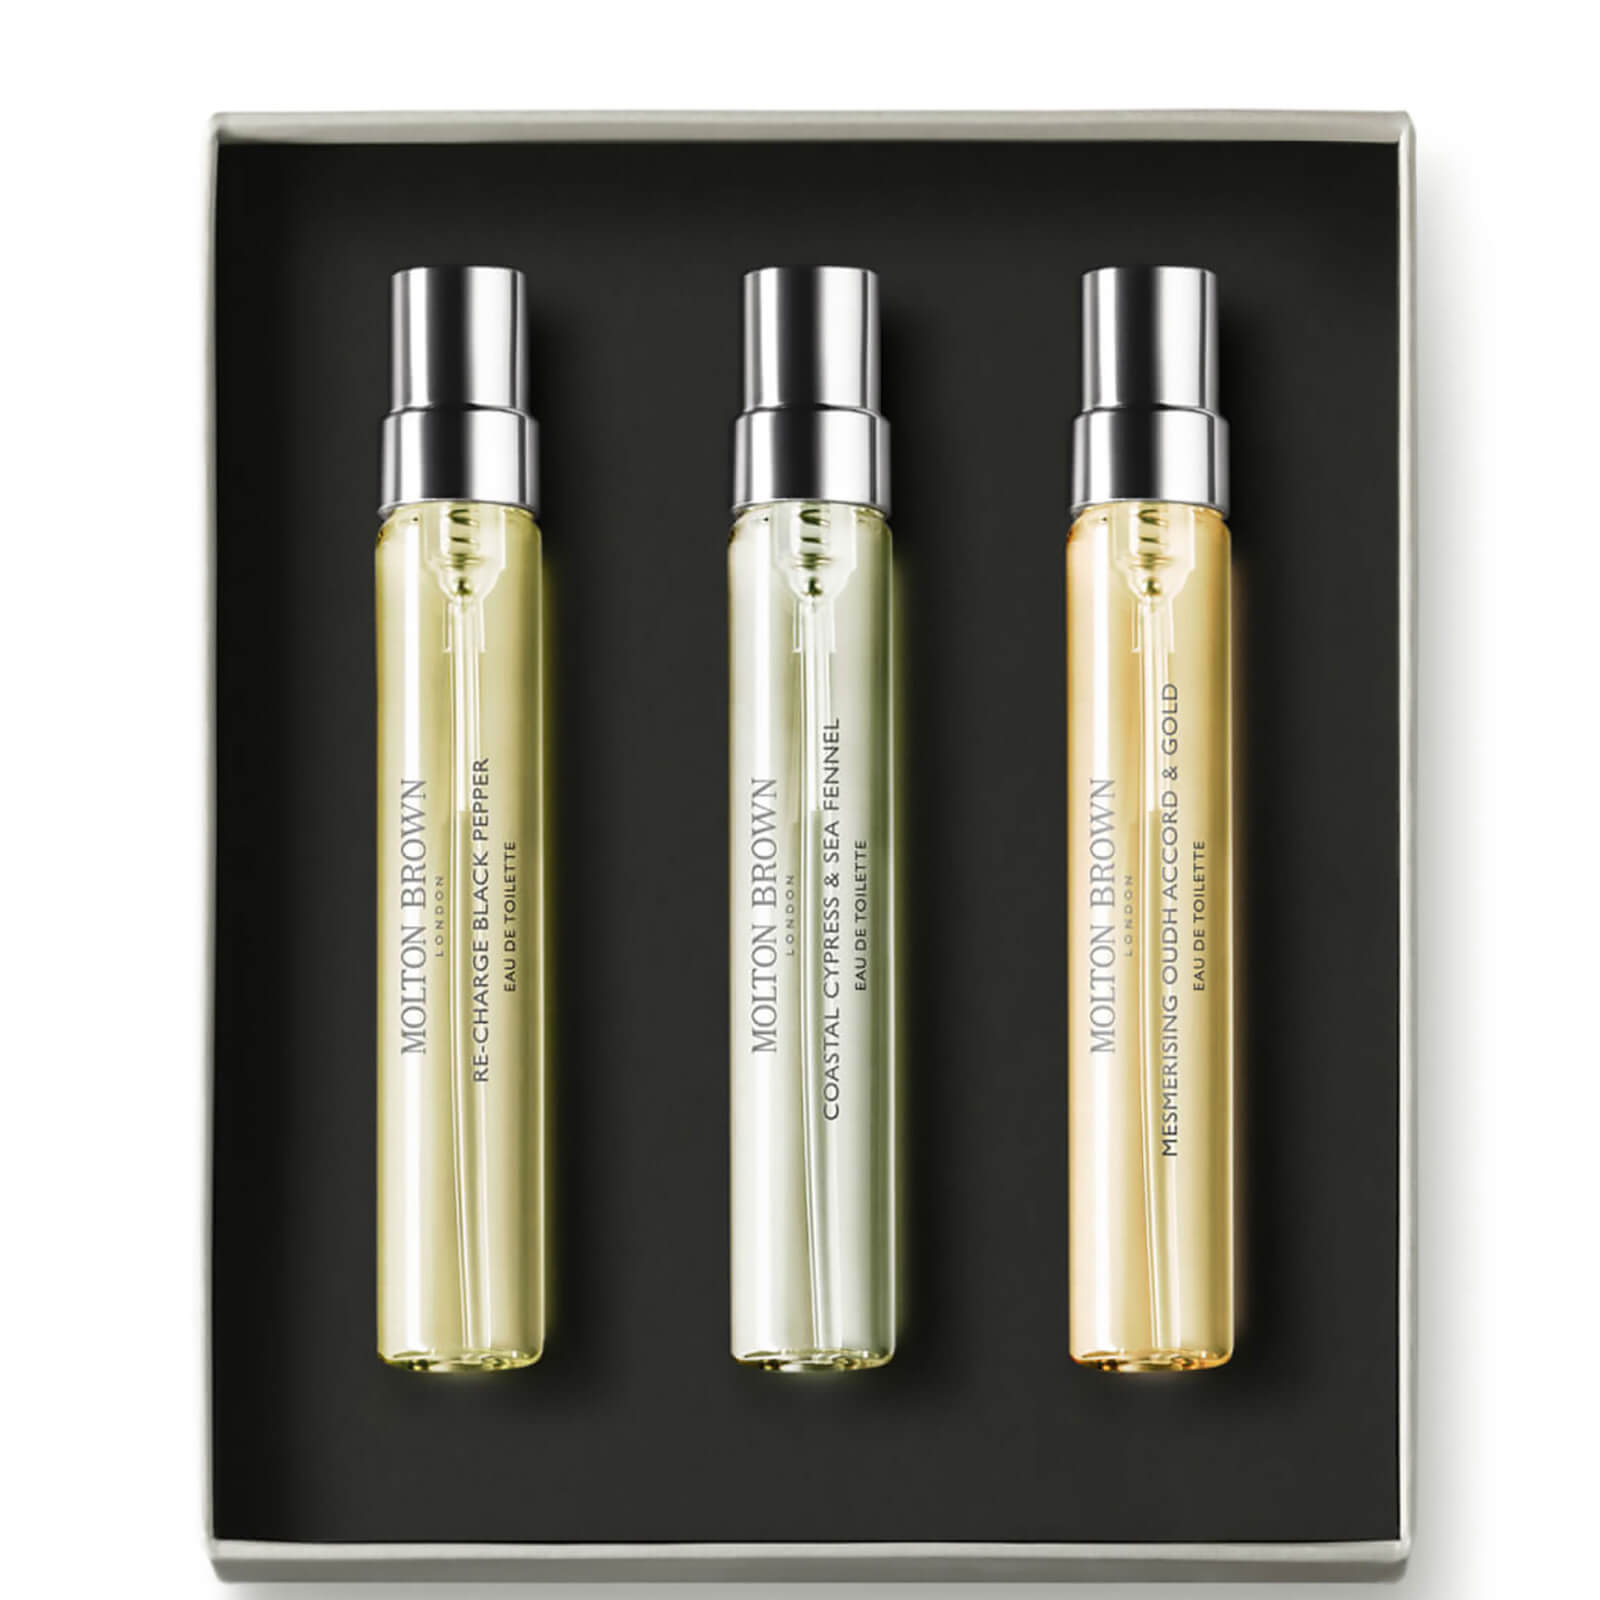 Molton Brown Woody & Aromatic Fragrance Discovery Set